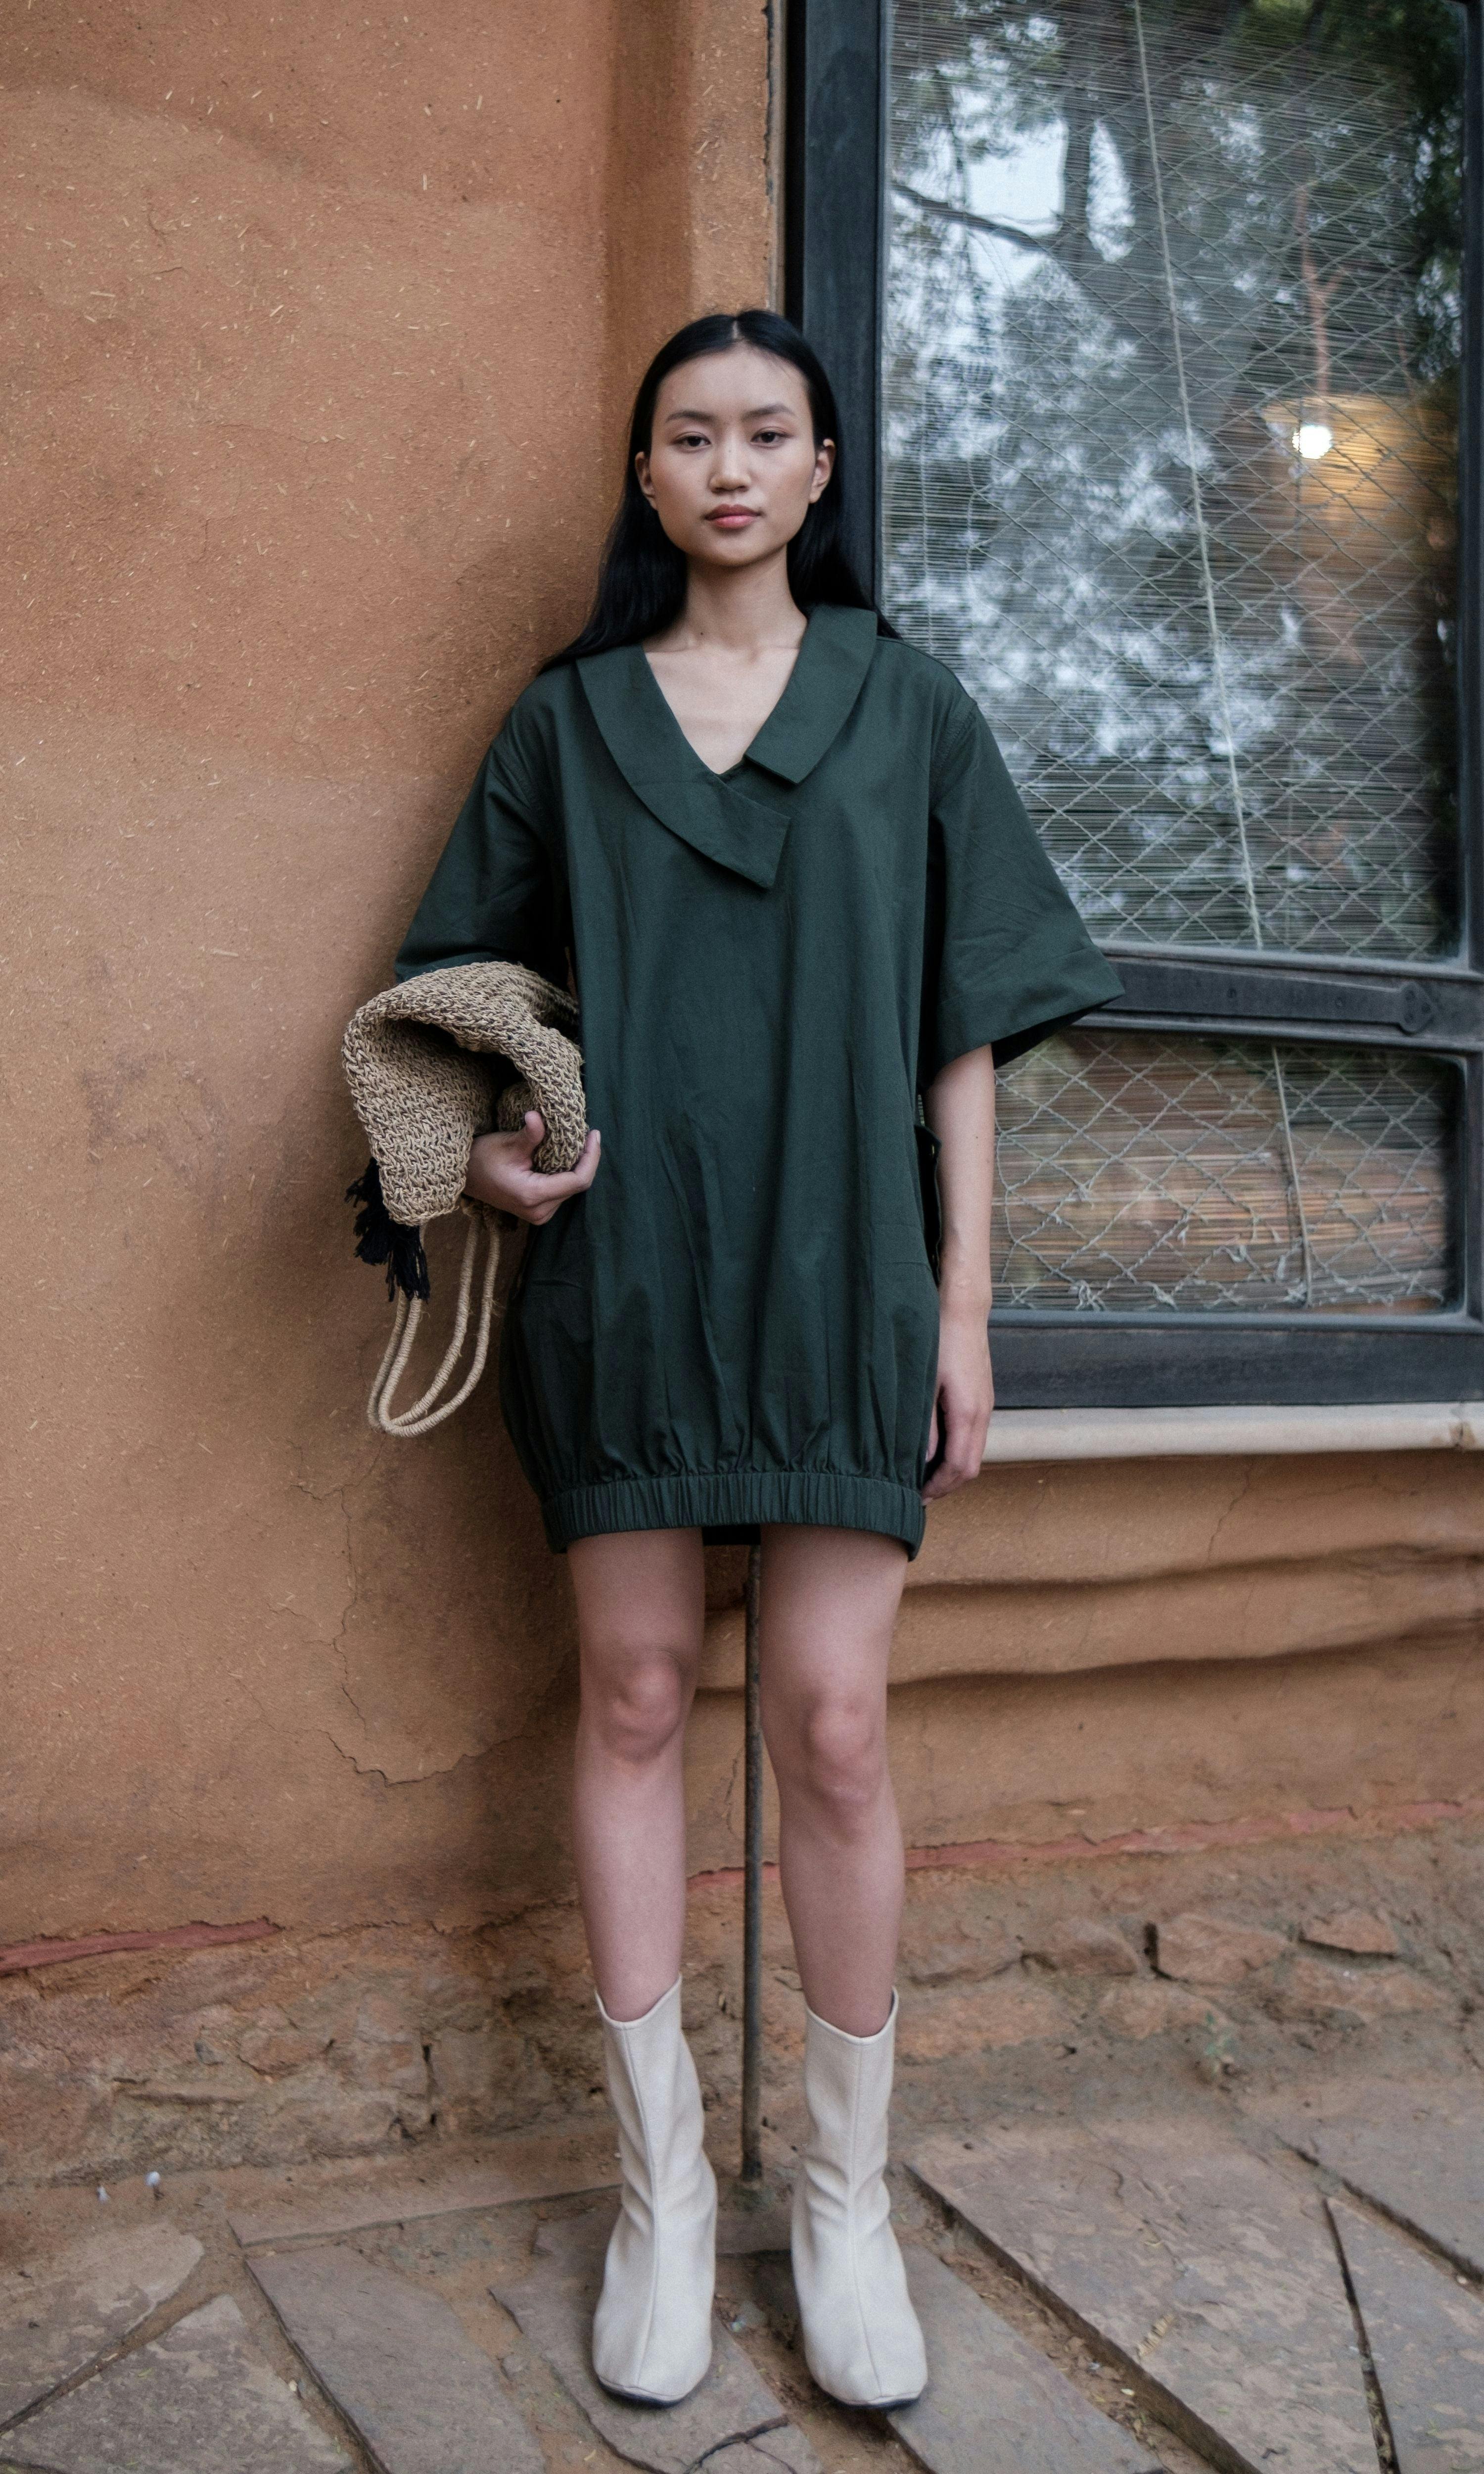 Sydney Shift Dress, a product by The Terra Tribe